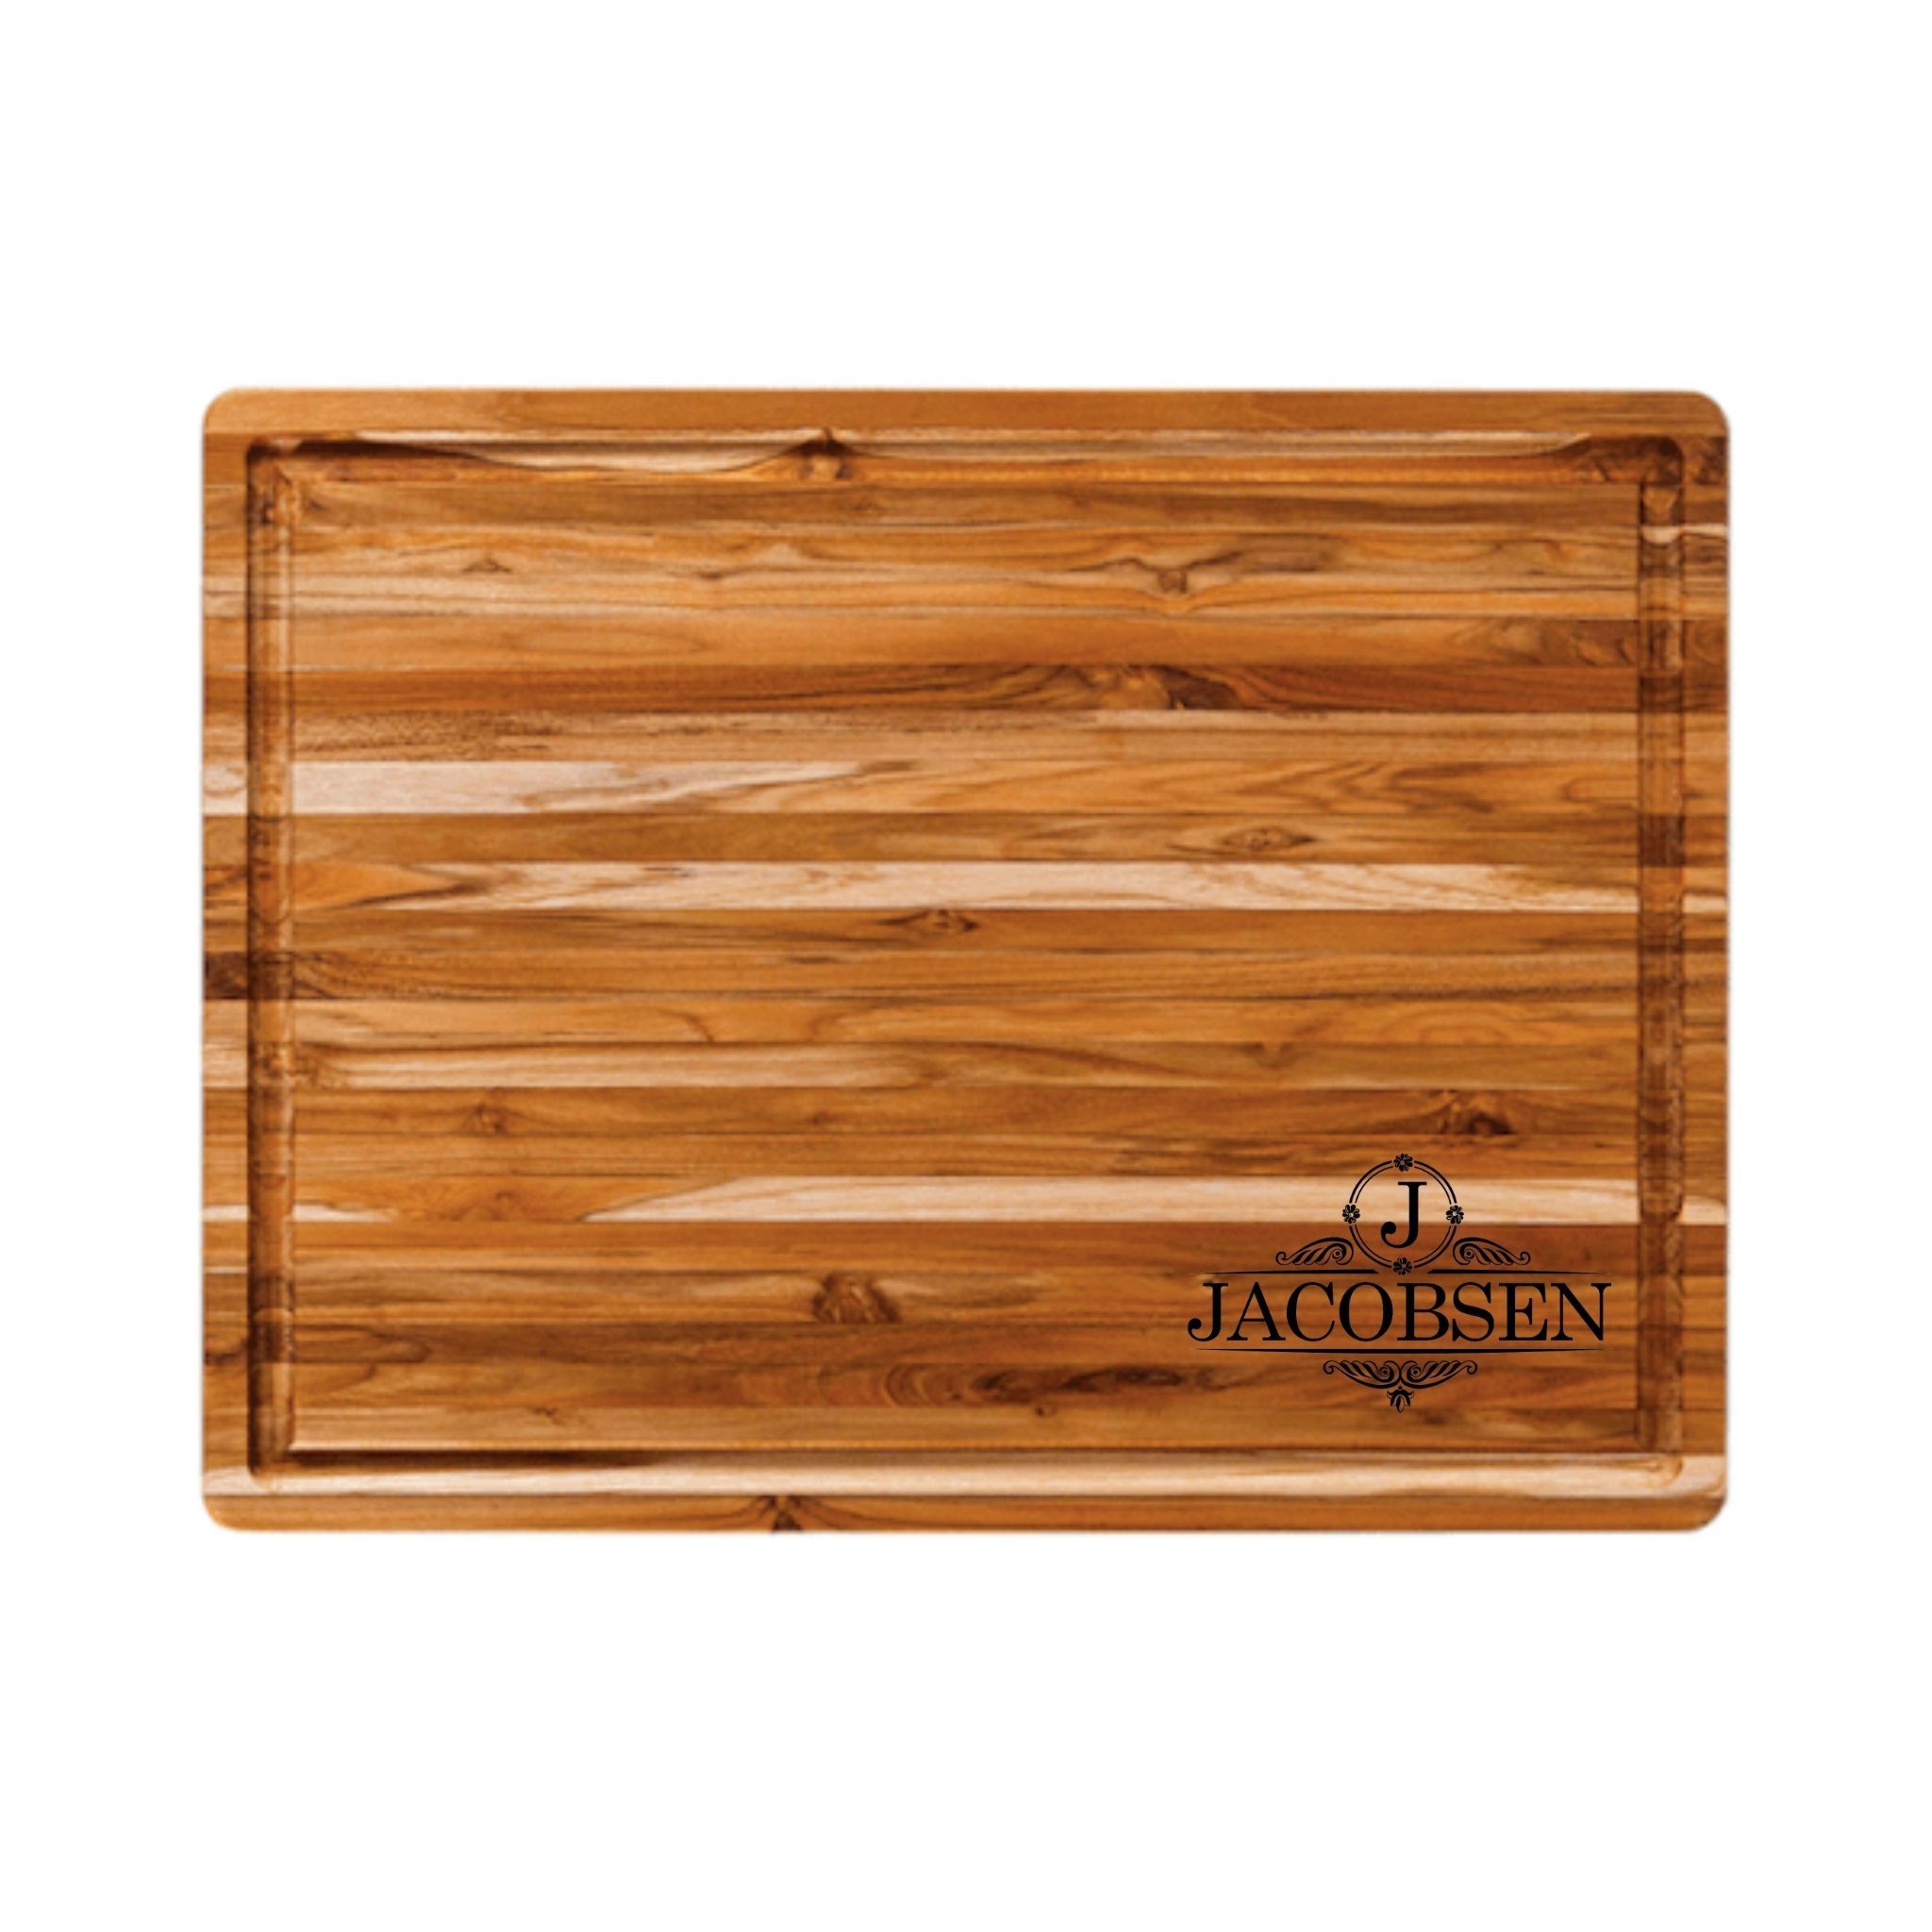 Small Chef Cutting Board Made of Teak